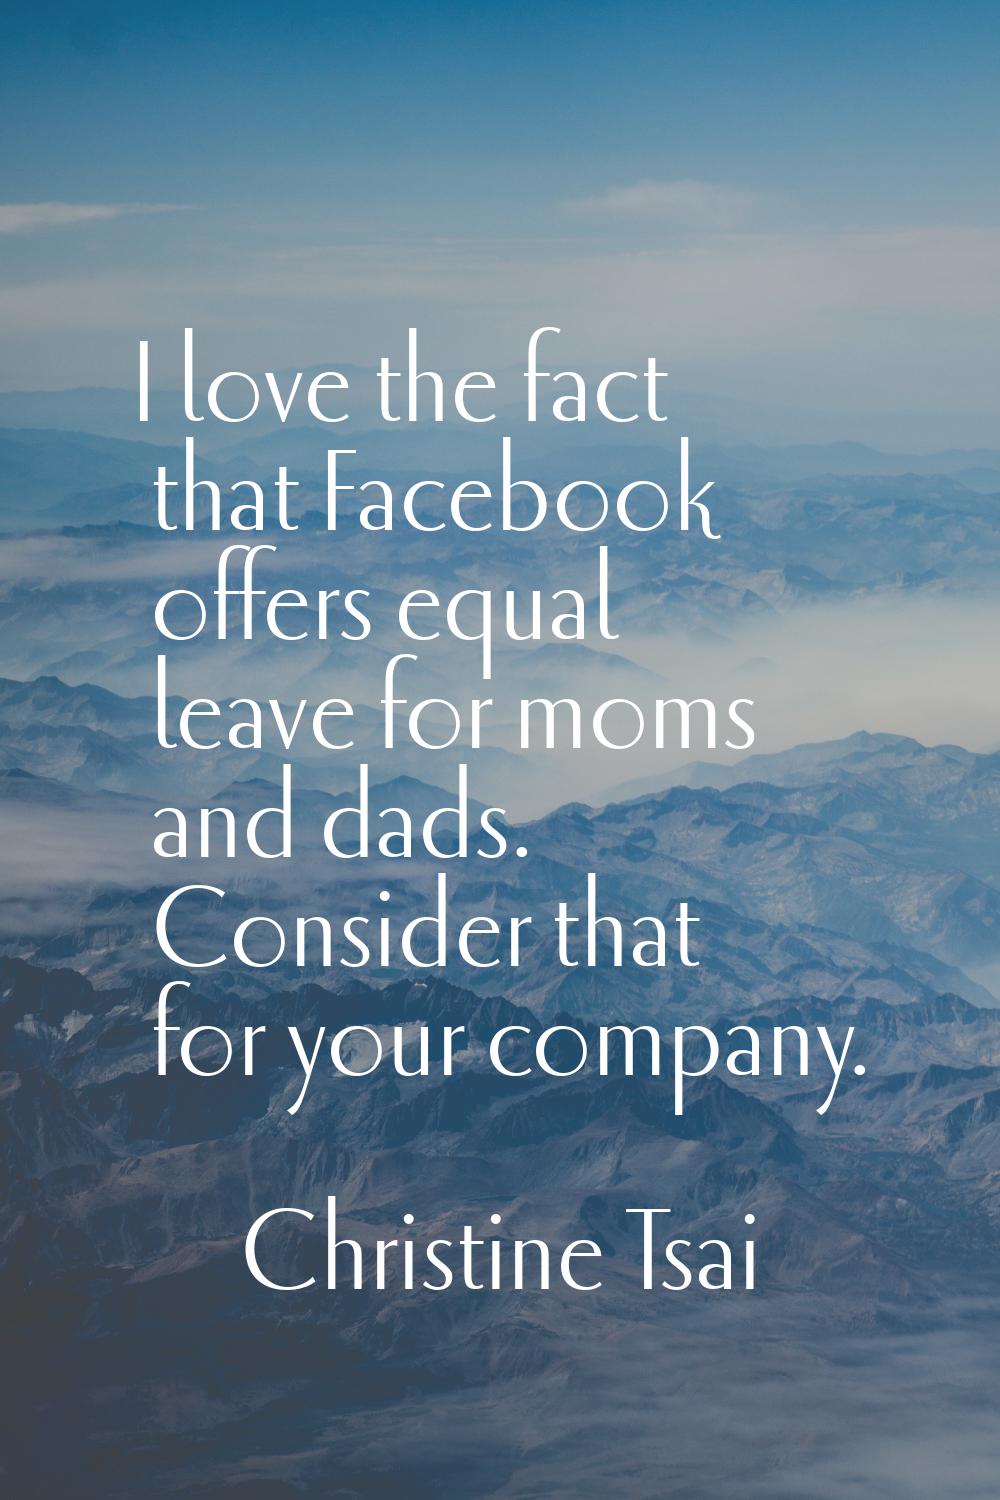 I love the fact that Facebook offers equal leave for moms and dads. Consider that for your company.